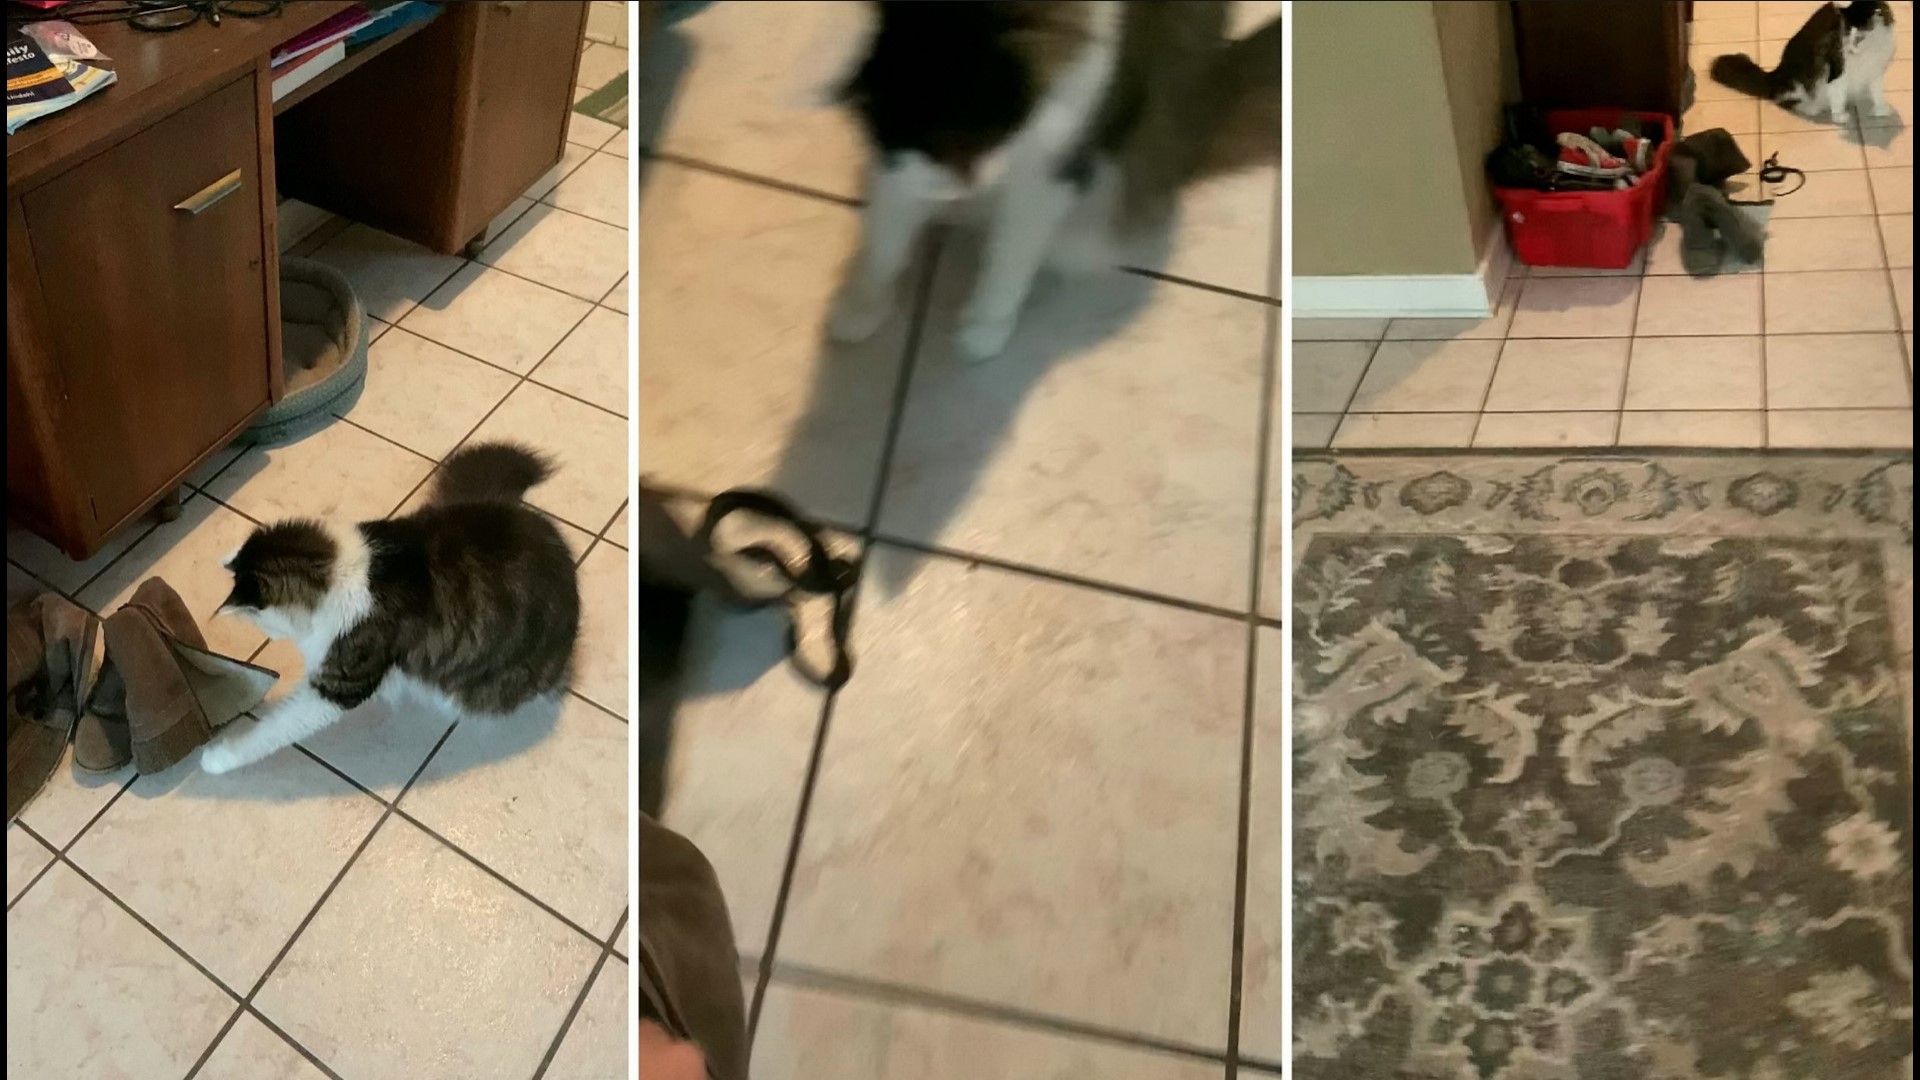 Snake Surprise! Funny Video Shows Owner Shocked When Finding Cat Playing  With Snake! 